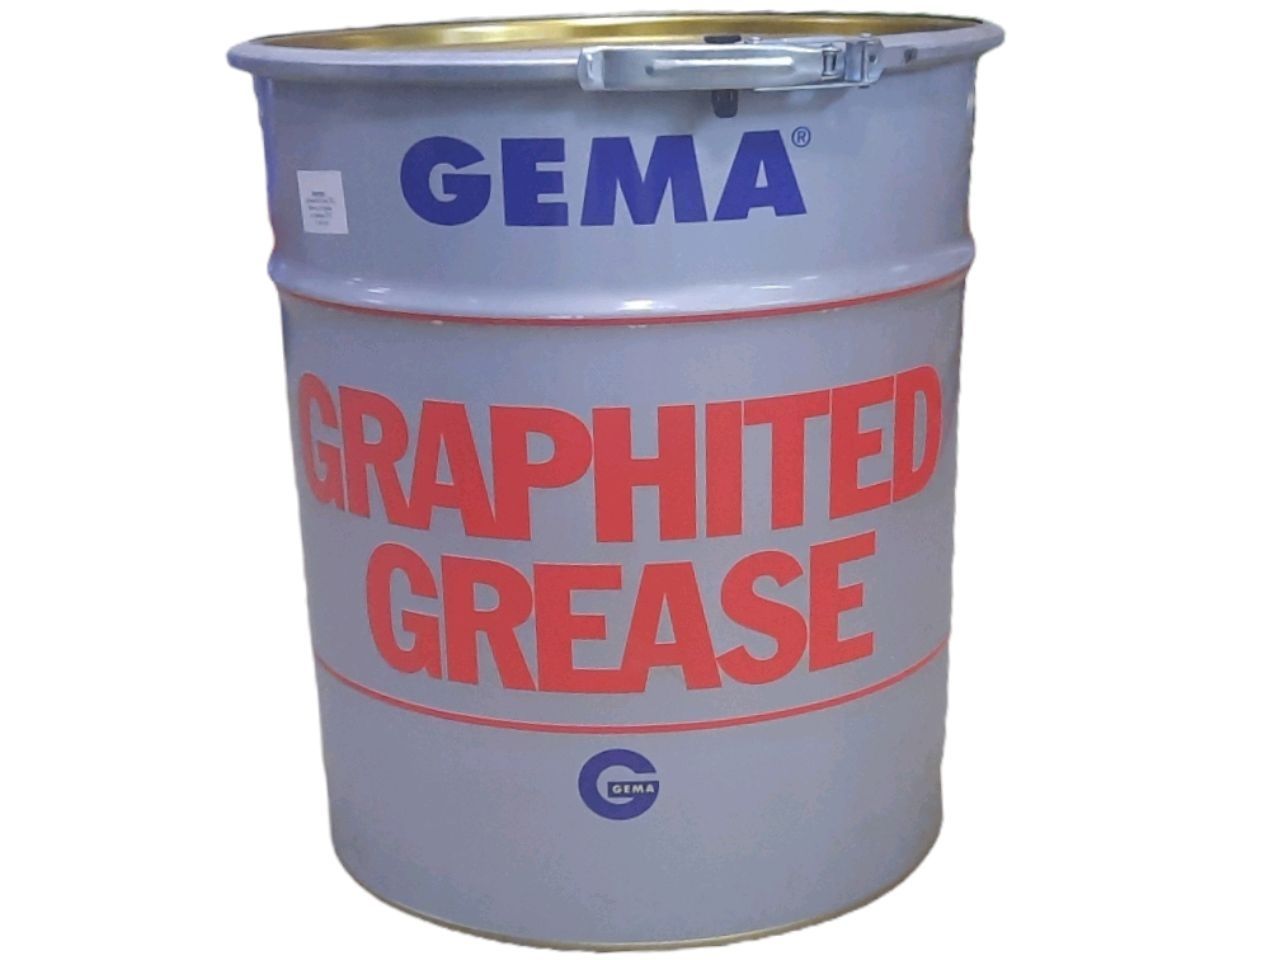 GEMA OIL GRAPHITED GREASE 15kg